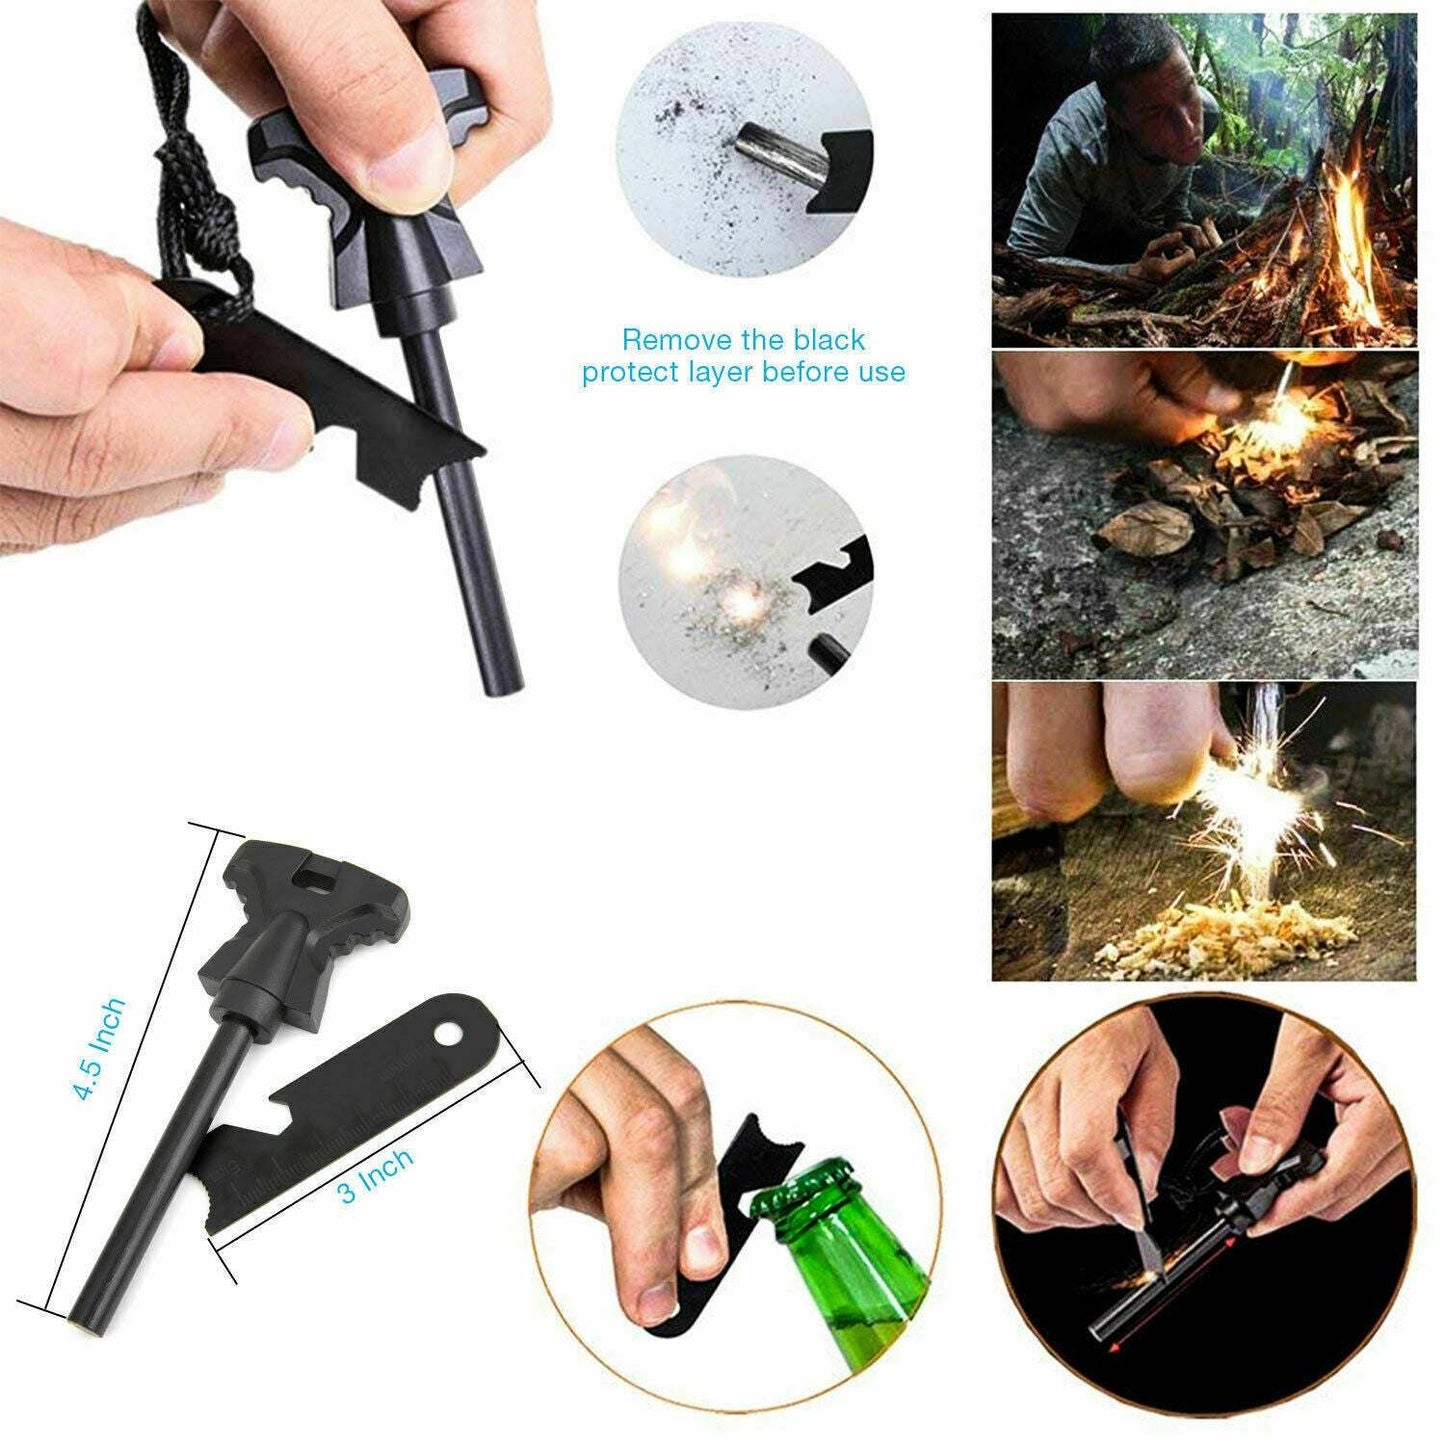 Outdoor Emergency Survival Gear Kit Camping Tactical Tools